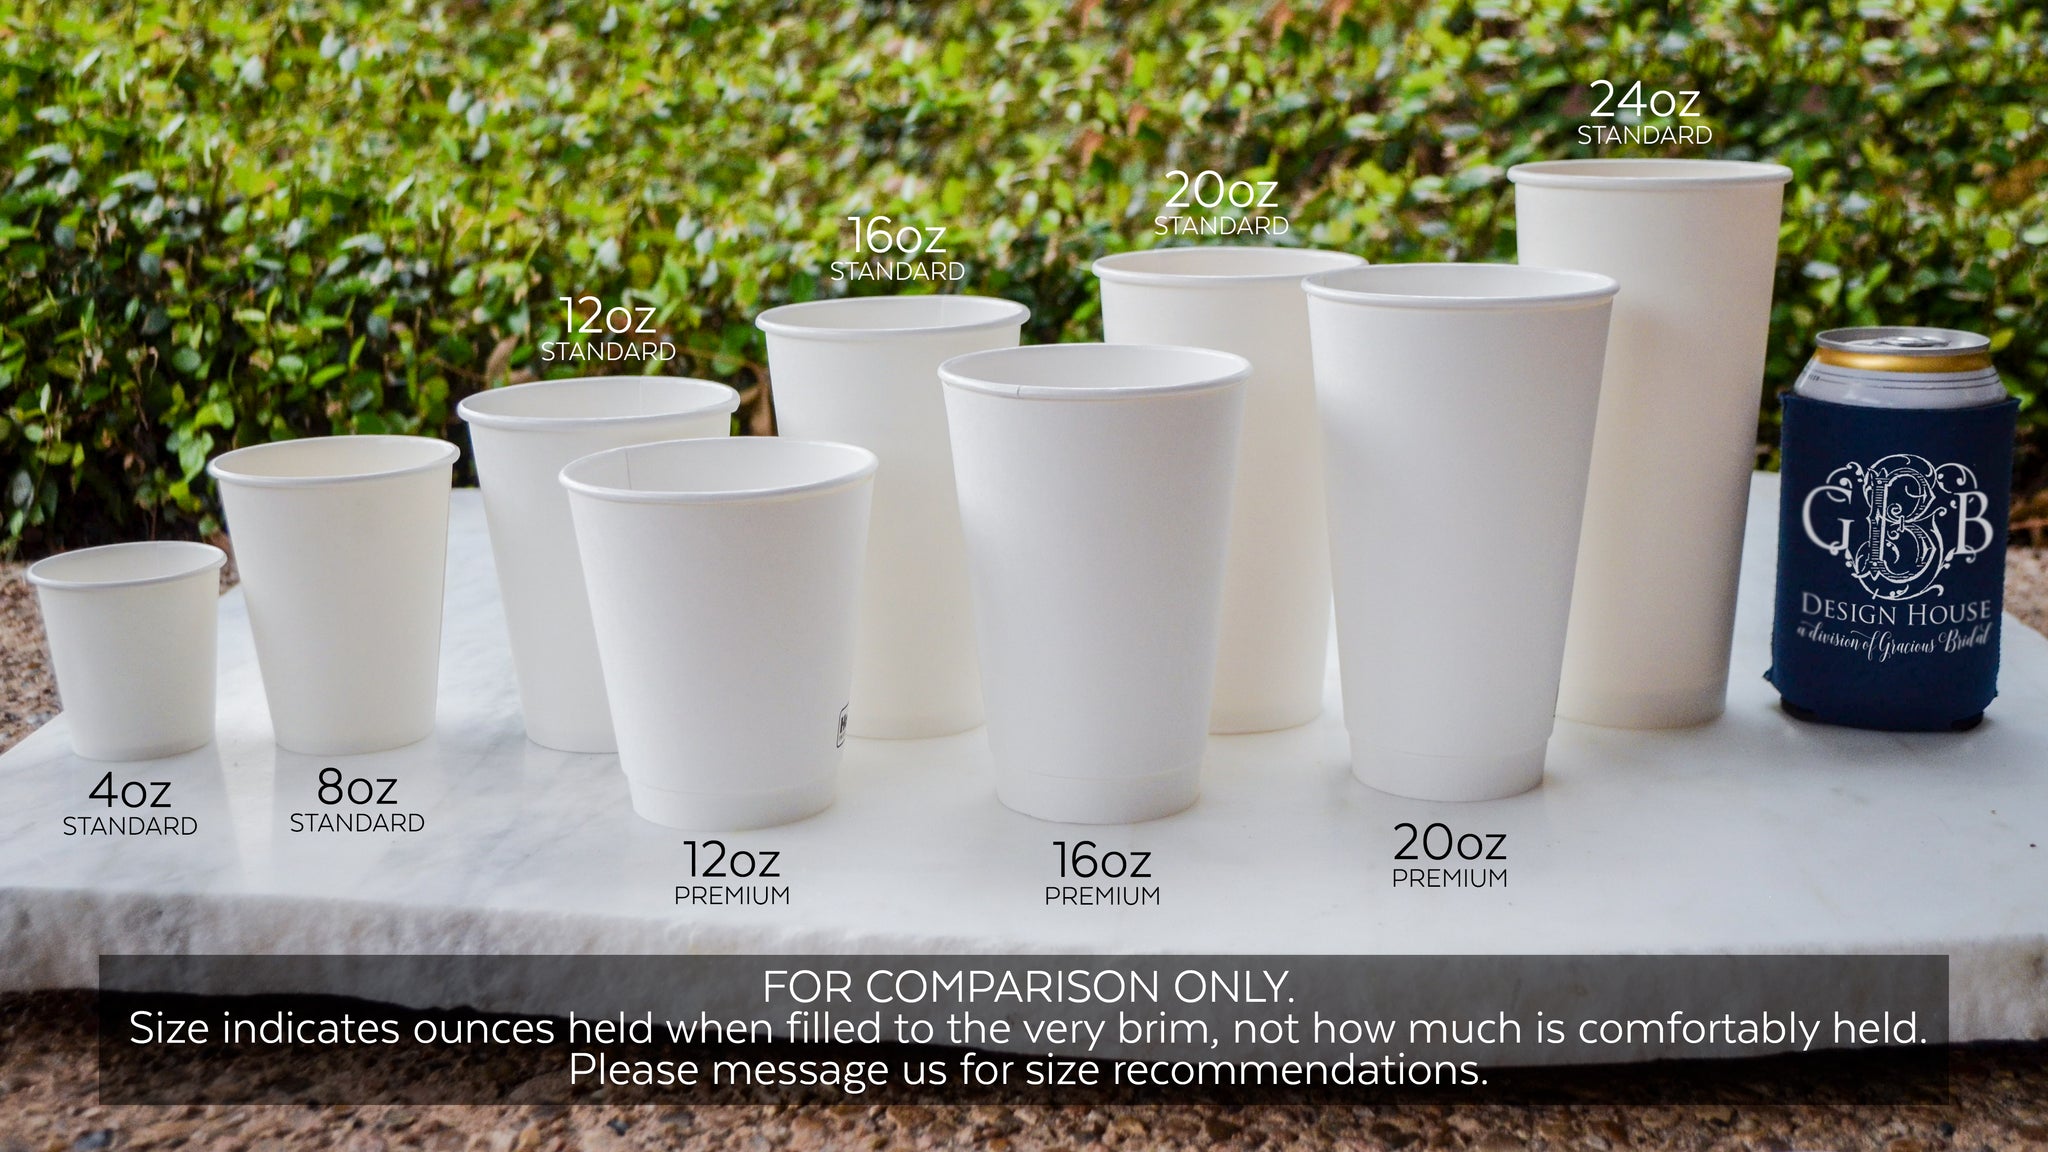 12 oz Paper Cups for Wedding, Custom Wedding Paper Cups